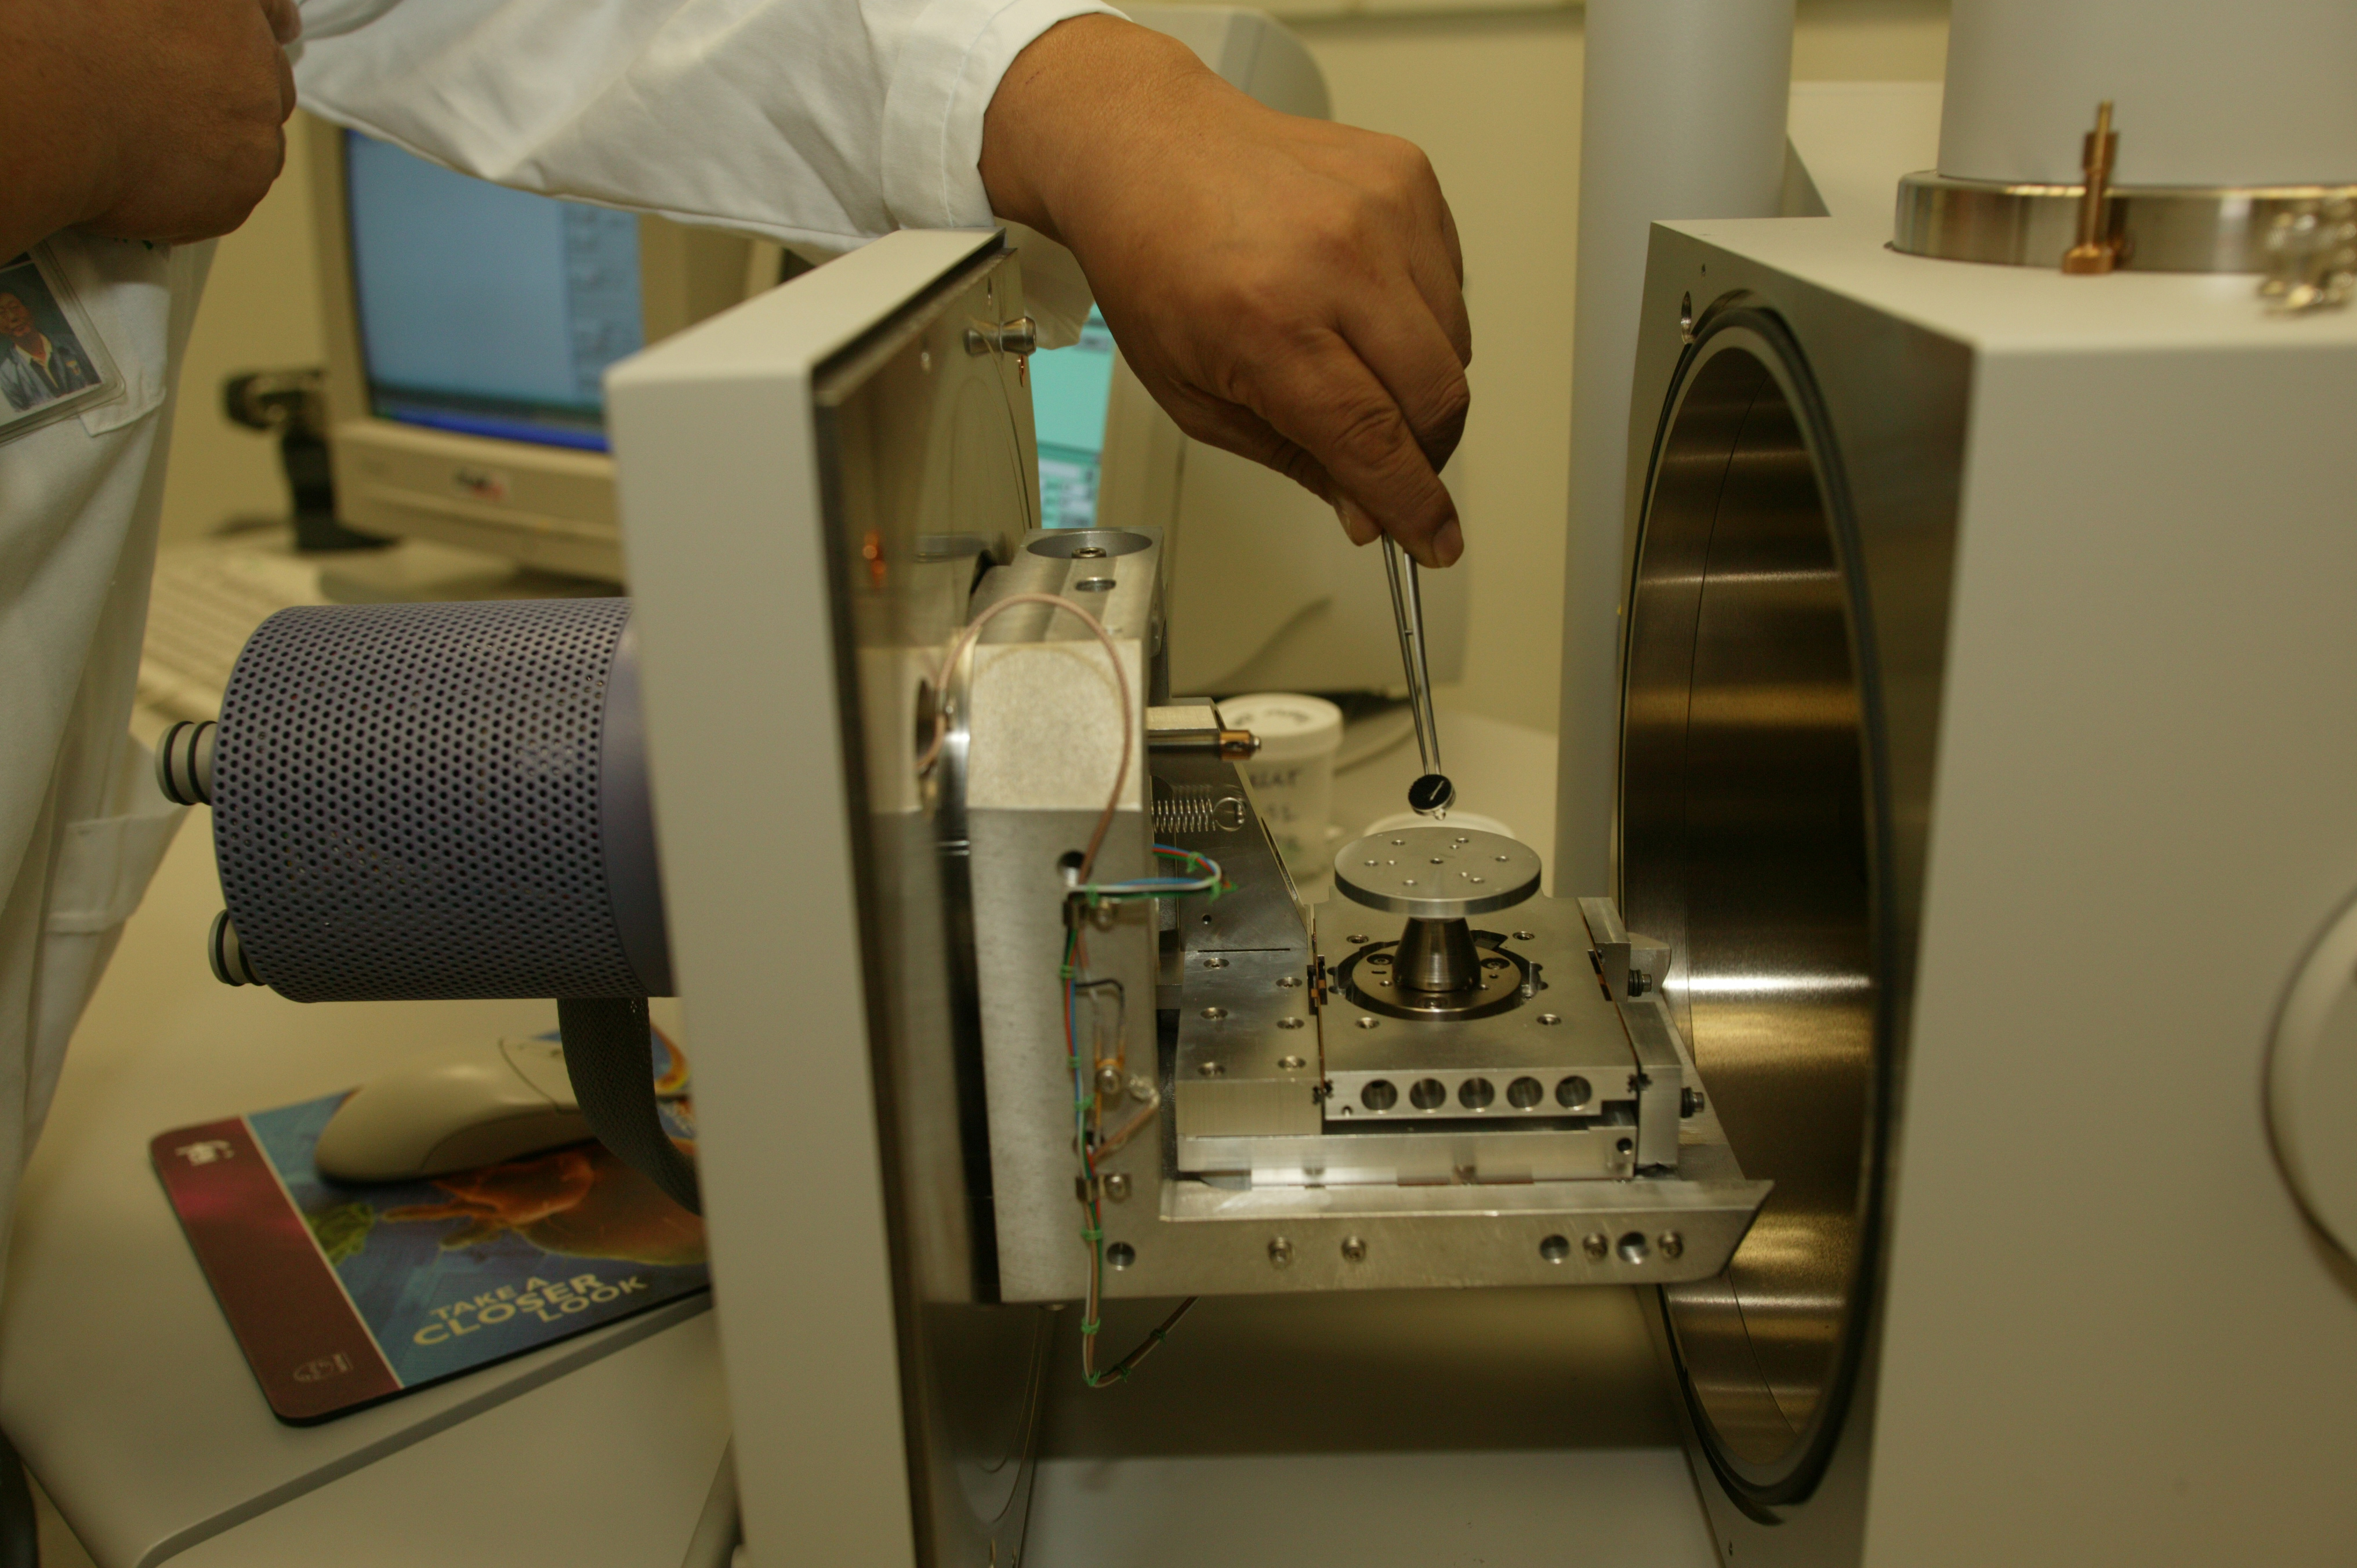 With highly sophisticated testing equipment CBP Laboratory personnel can analyze minute traces of material imported to the U.S.